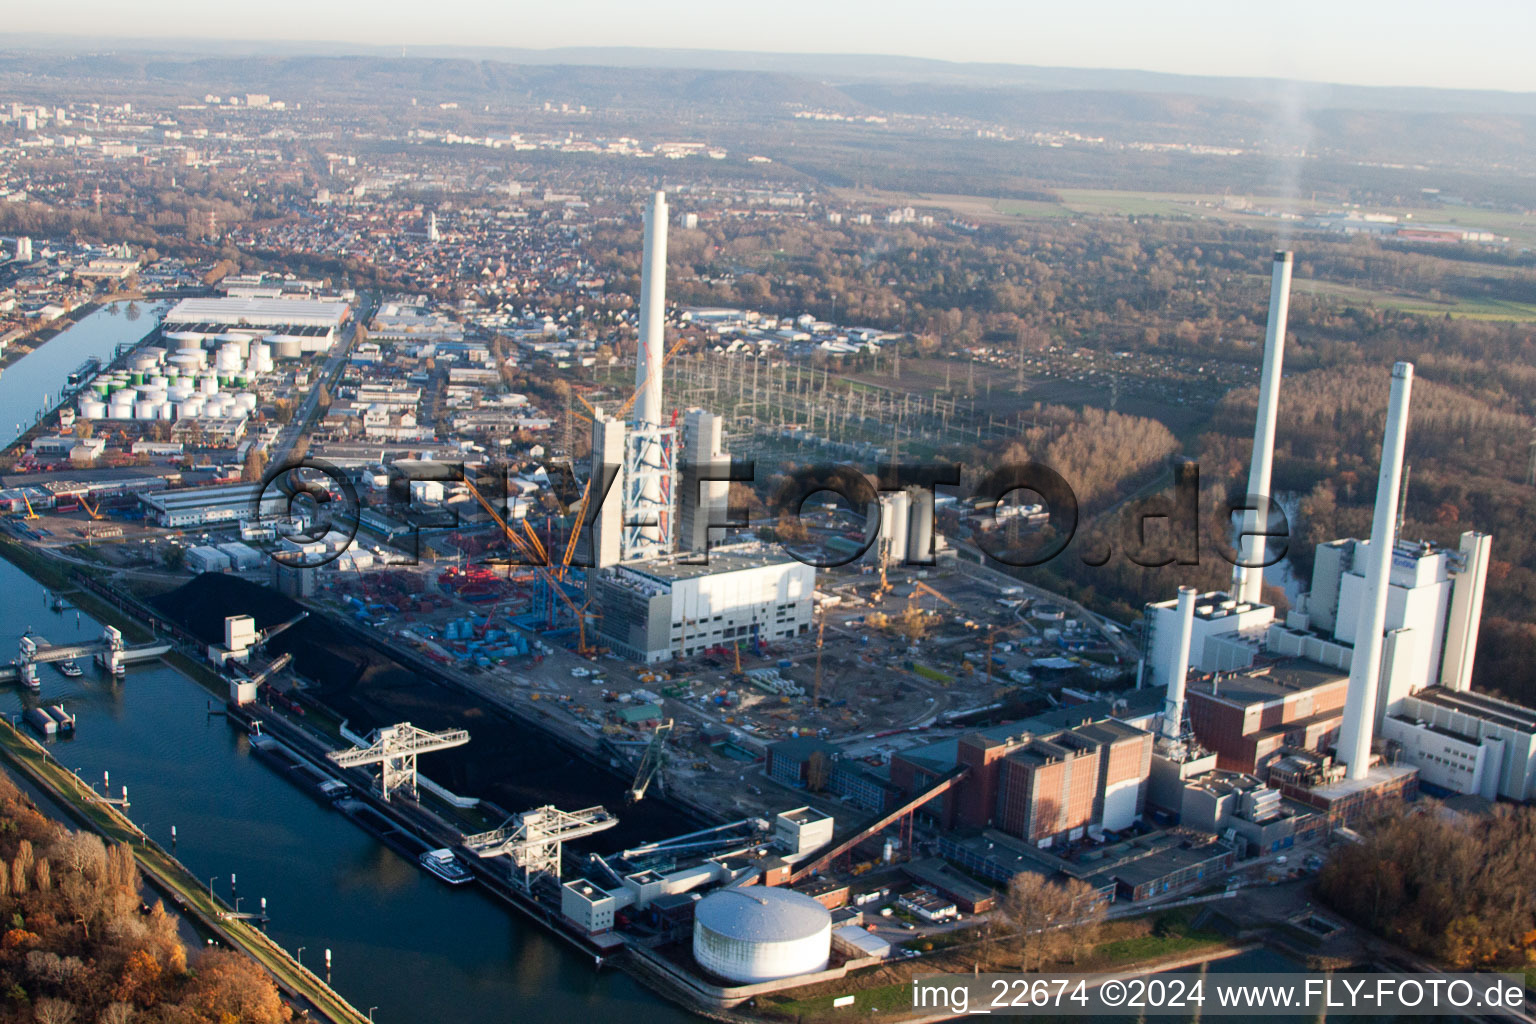 Drone recording of EnBW power plant in the district Rheinhafen in Karlsruhe in the state Baden-Wuerttemberg, Germany